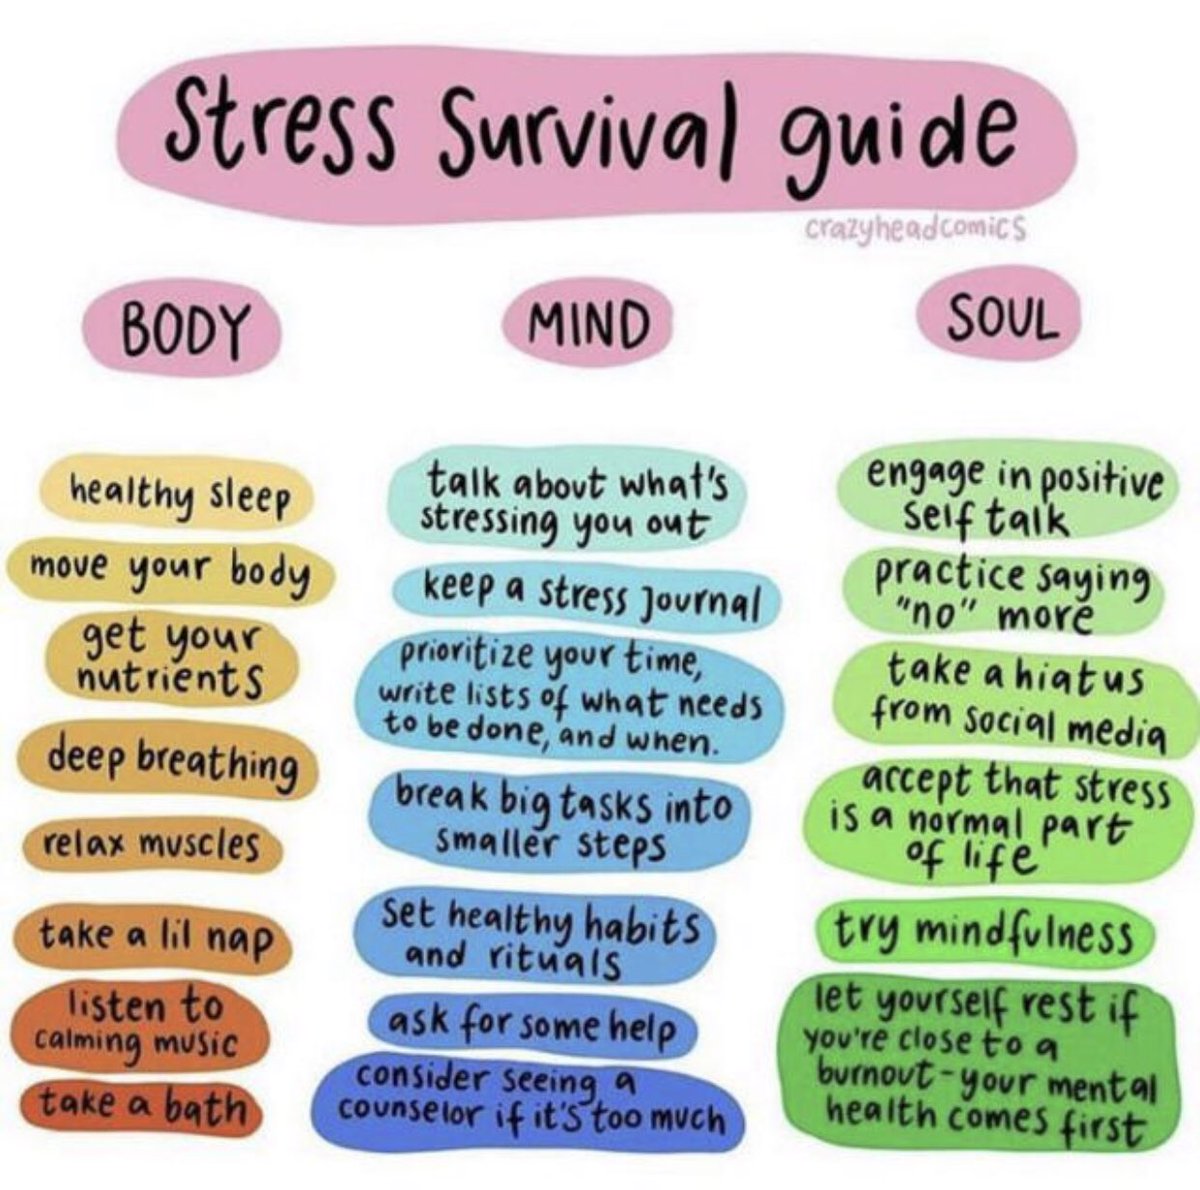 This is her WhatsApp DP right now. If you actually read it through, there’s gems in there. ‘Accept that stress is a normal part of life.’